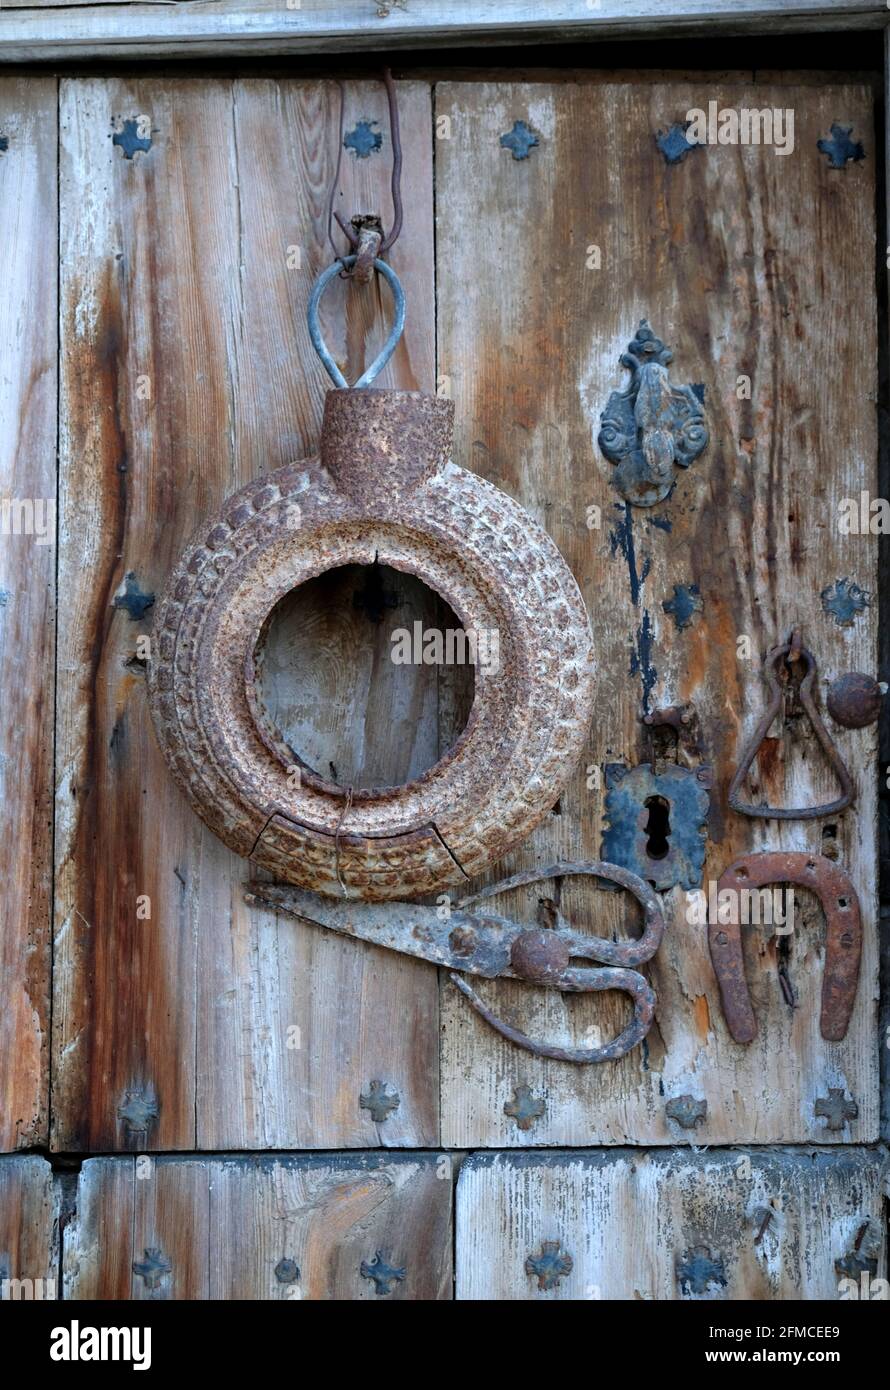 An old and delapidated back door in the village of Torrebaja in Valancia, Spain. It is decorated with an iron knocker and a pair of old sheep shears Stock Photo